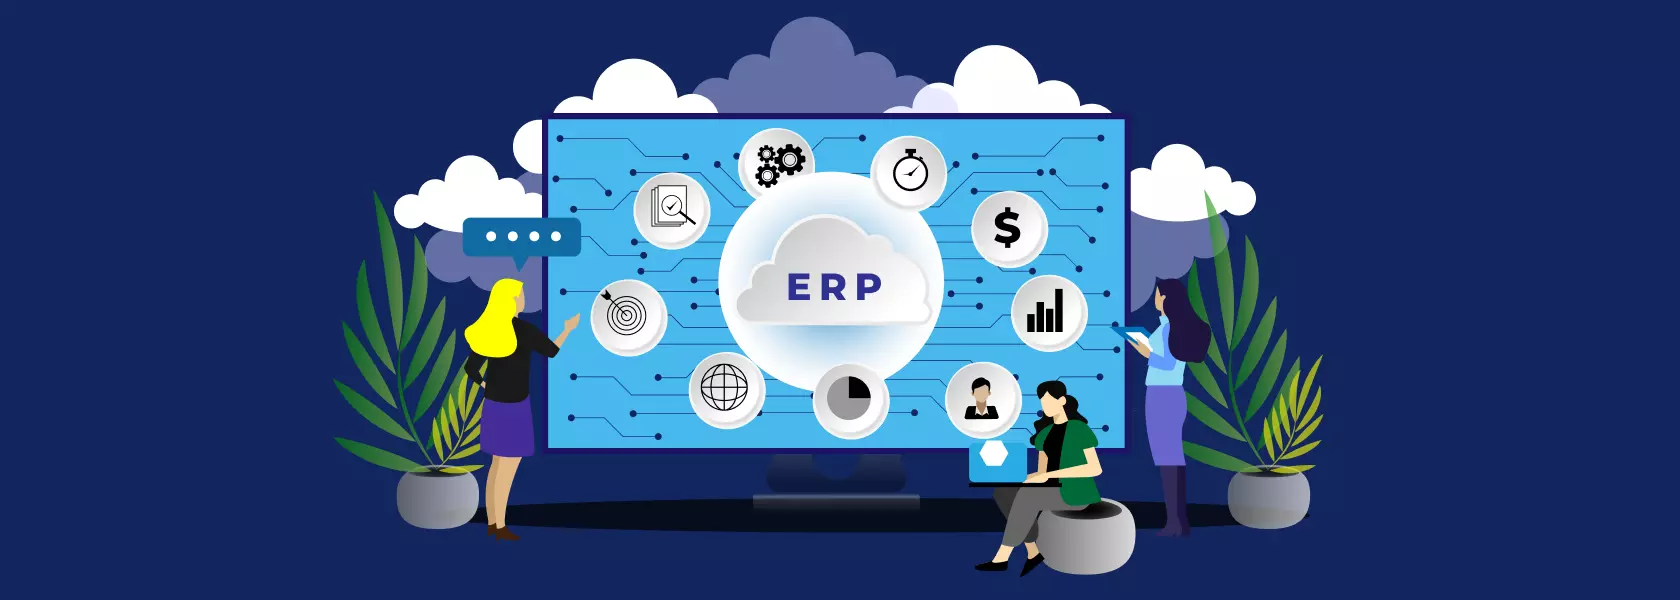 Why ERP in the Cloud is an Opportunity in 2021